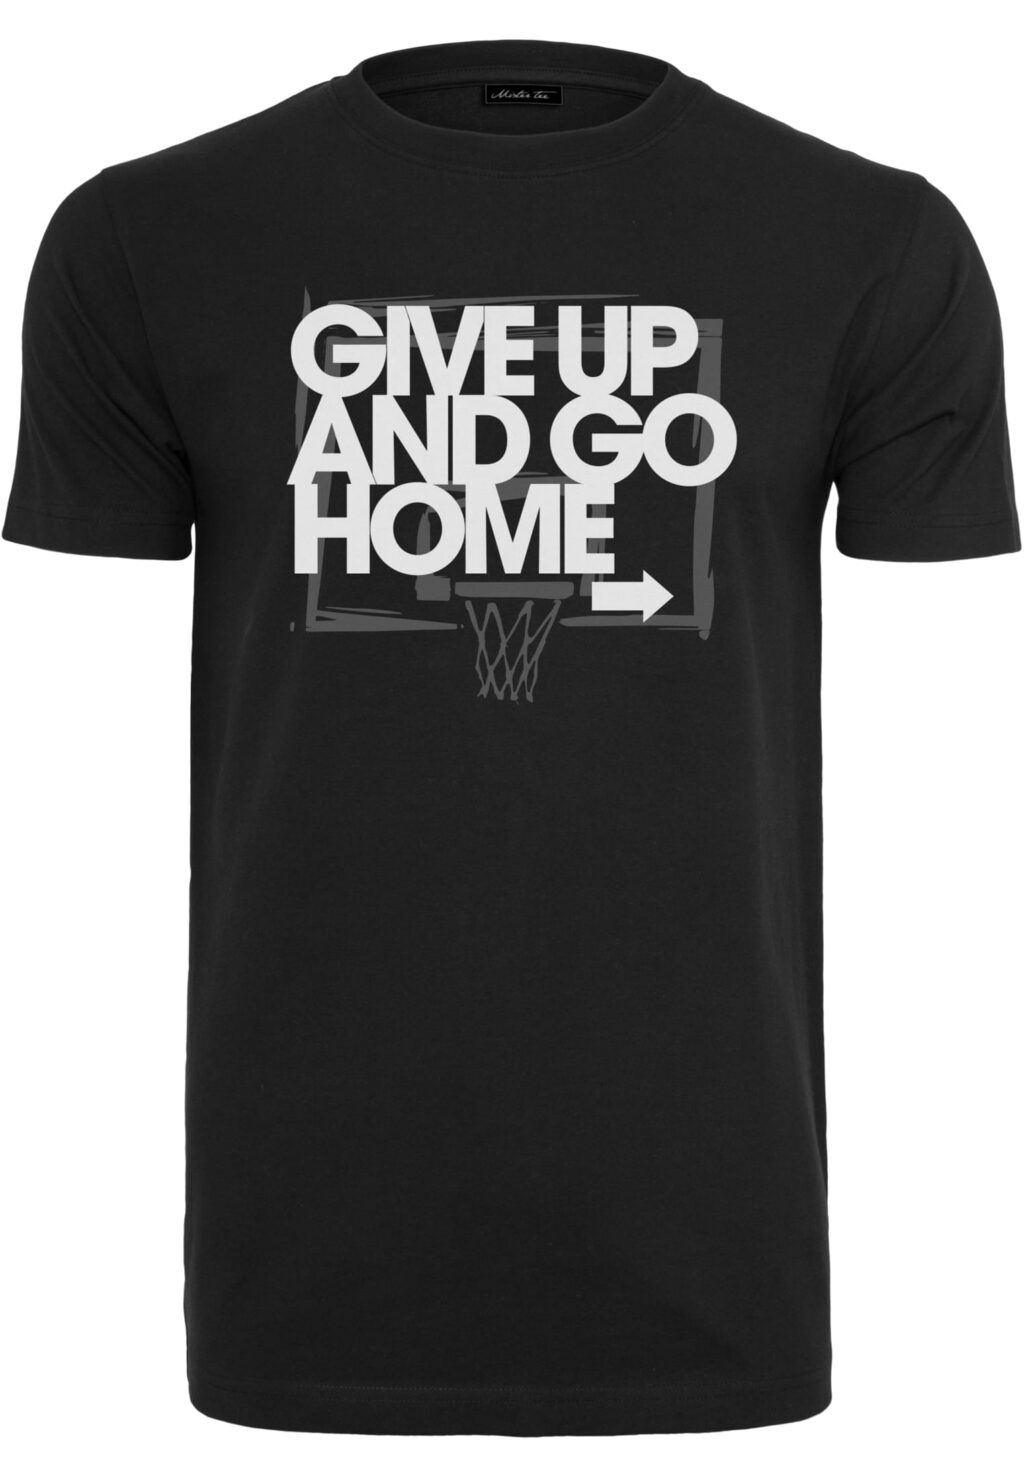 Give Up and Go Home Tee black MT2598